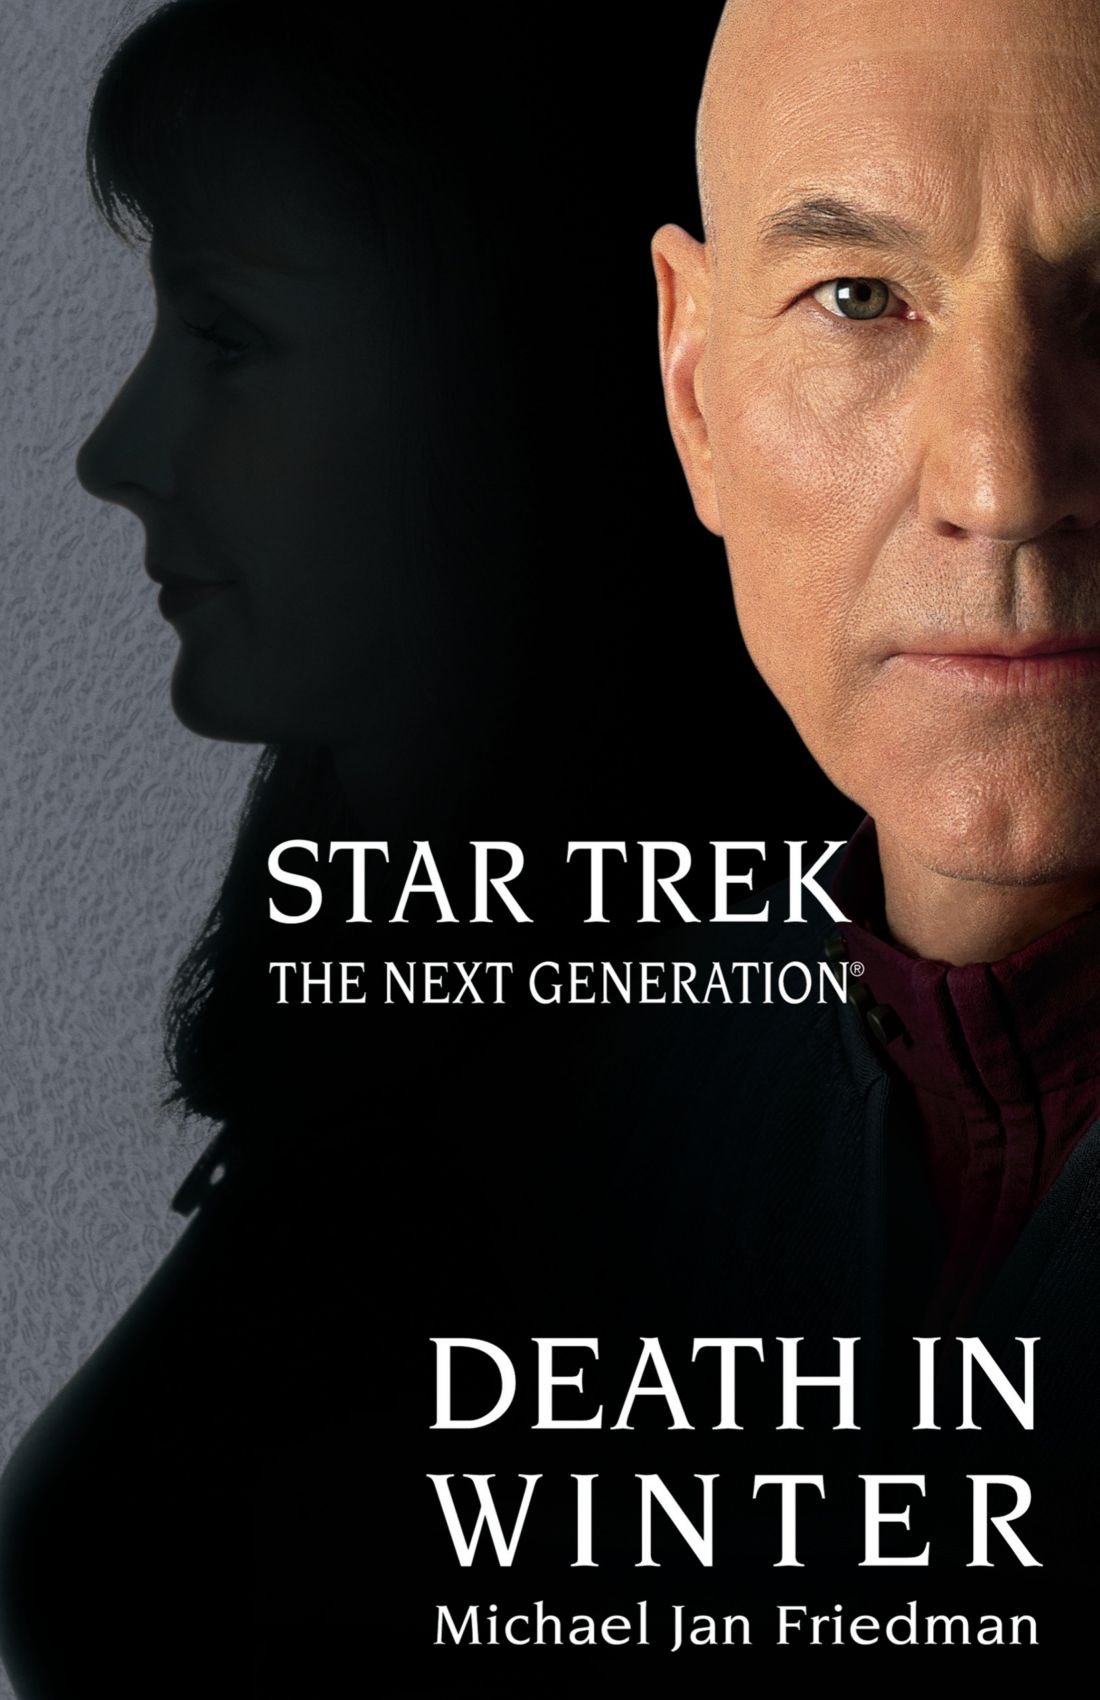 “Star Trek: The Next Generation: Death in Winter” Review by Motionpicturescomics.com